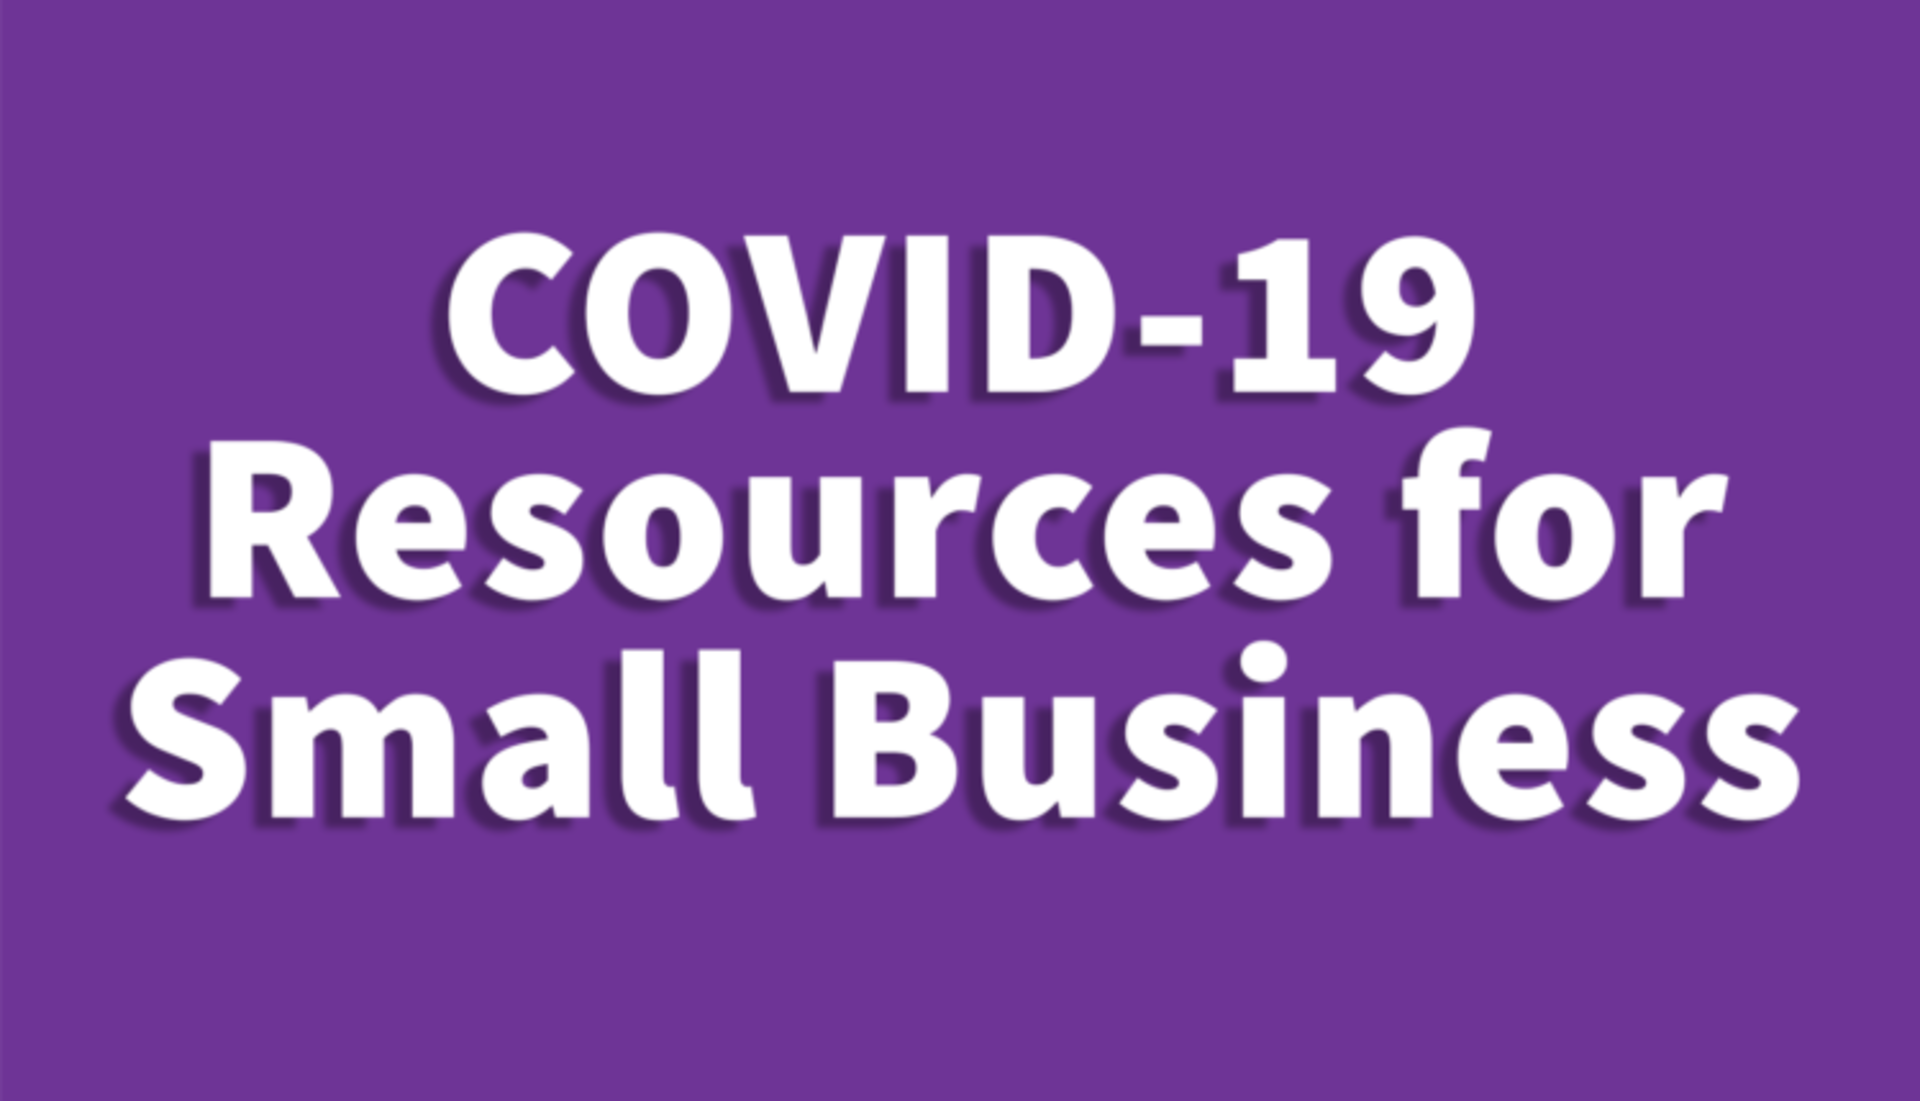 Federal Government To Assist Small Businesses During COVID